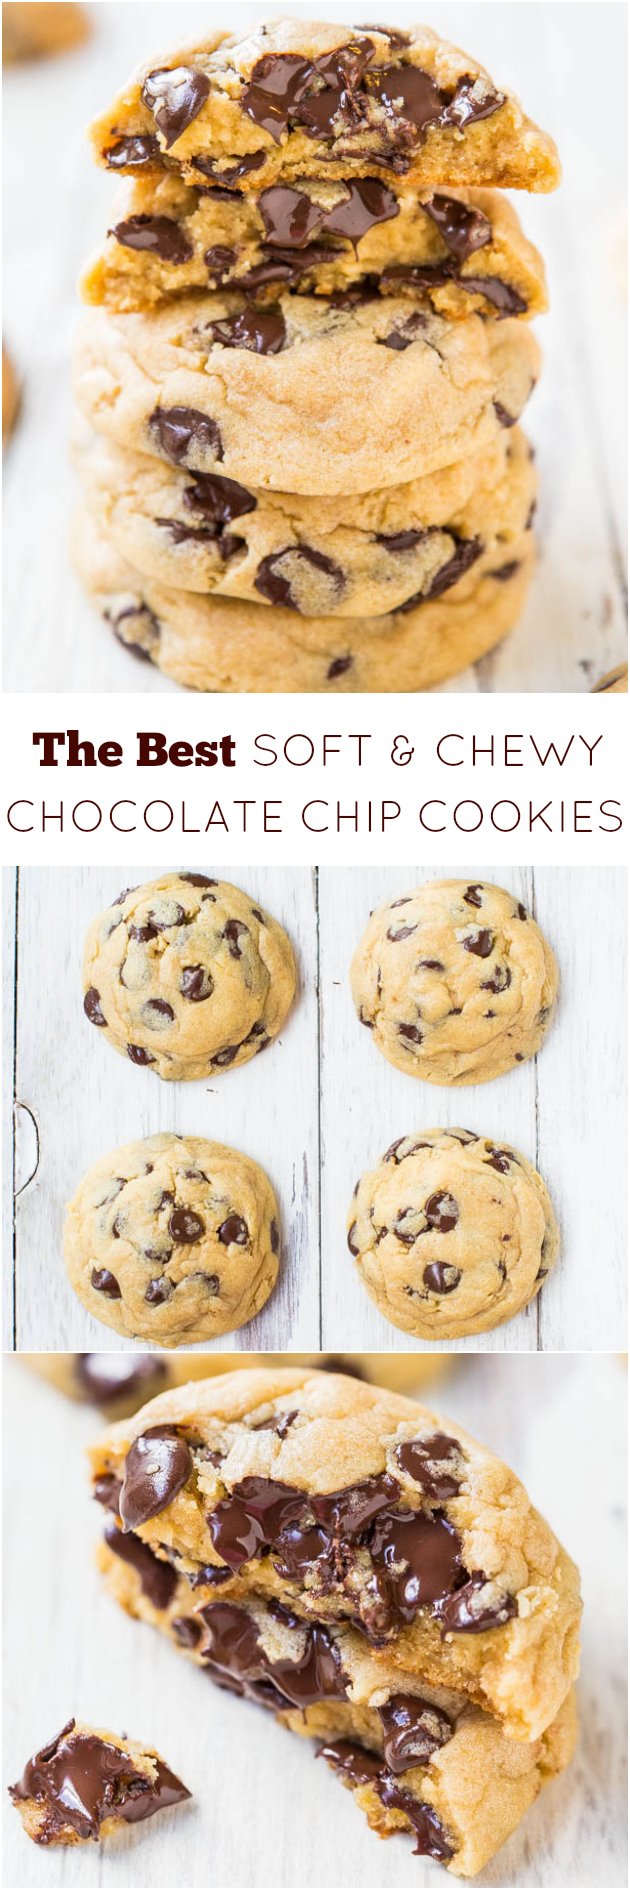 The Best Soft and Chewy Chocolate Chip Cookies - My favorite recipe for chocolate chip cookies! Just one bite and I think you'll agree!